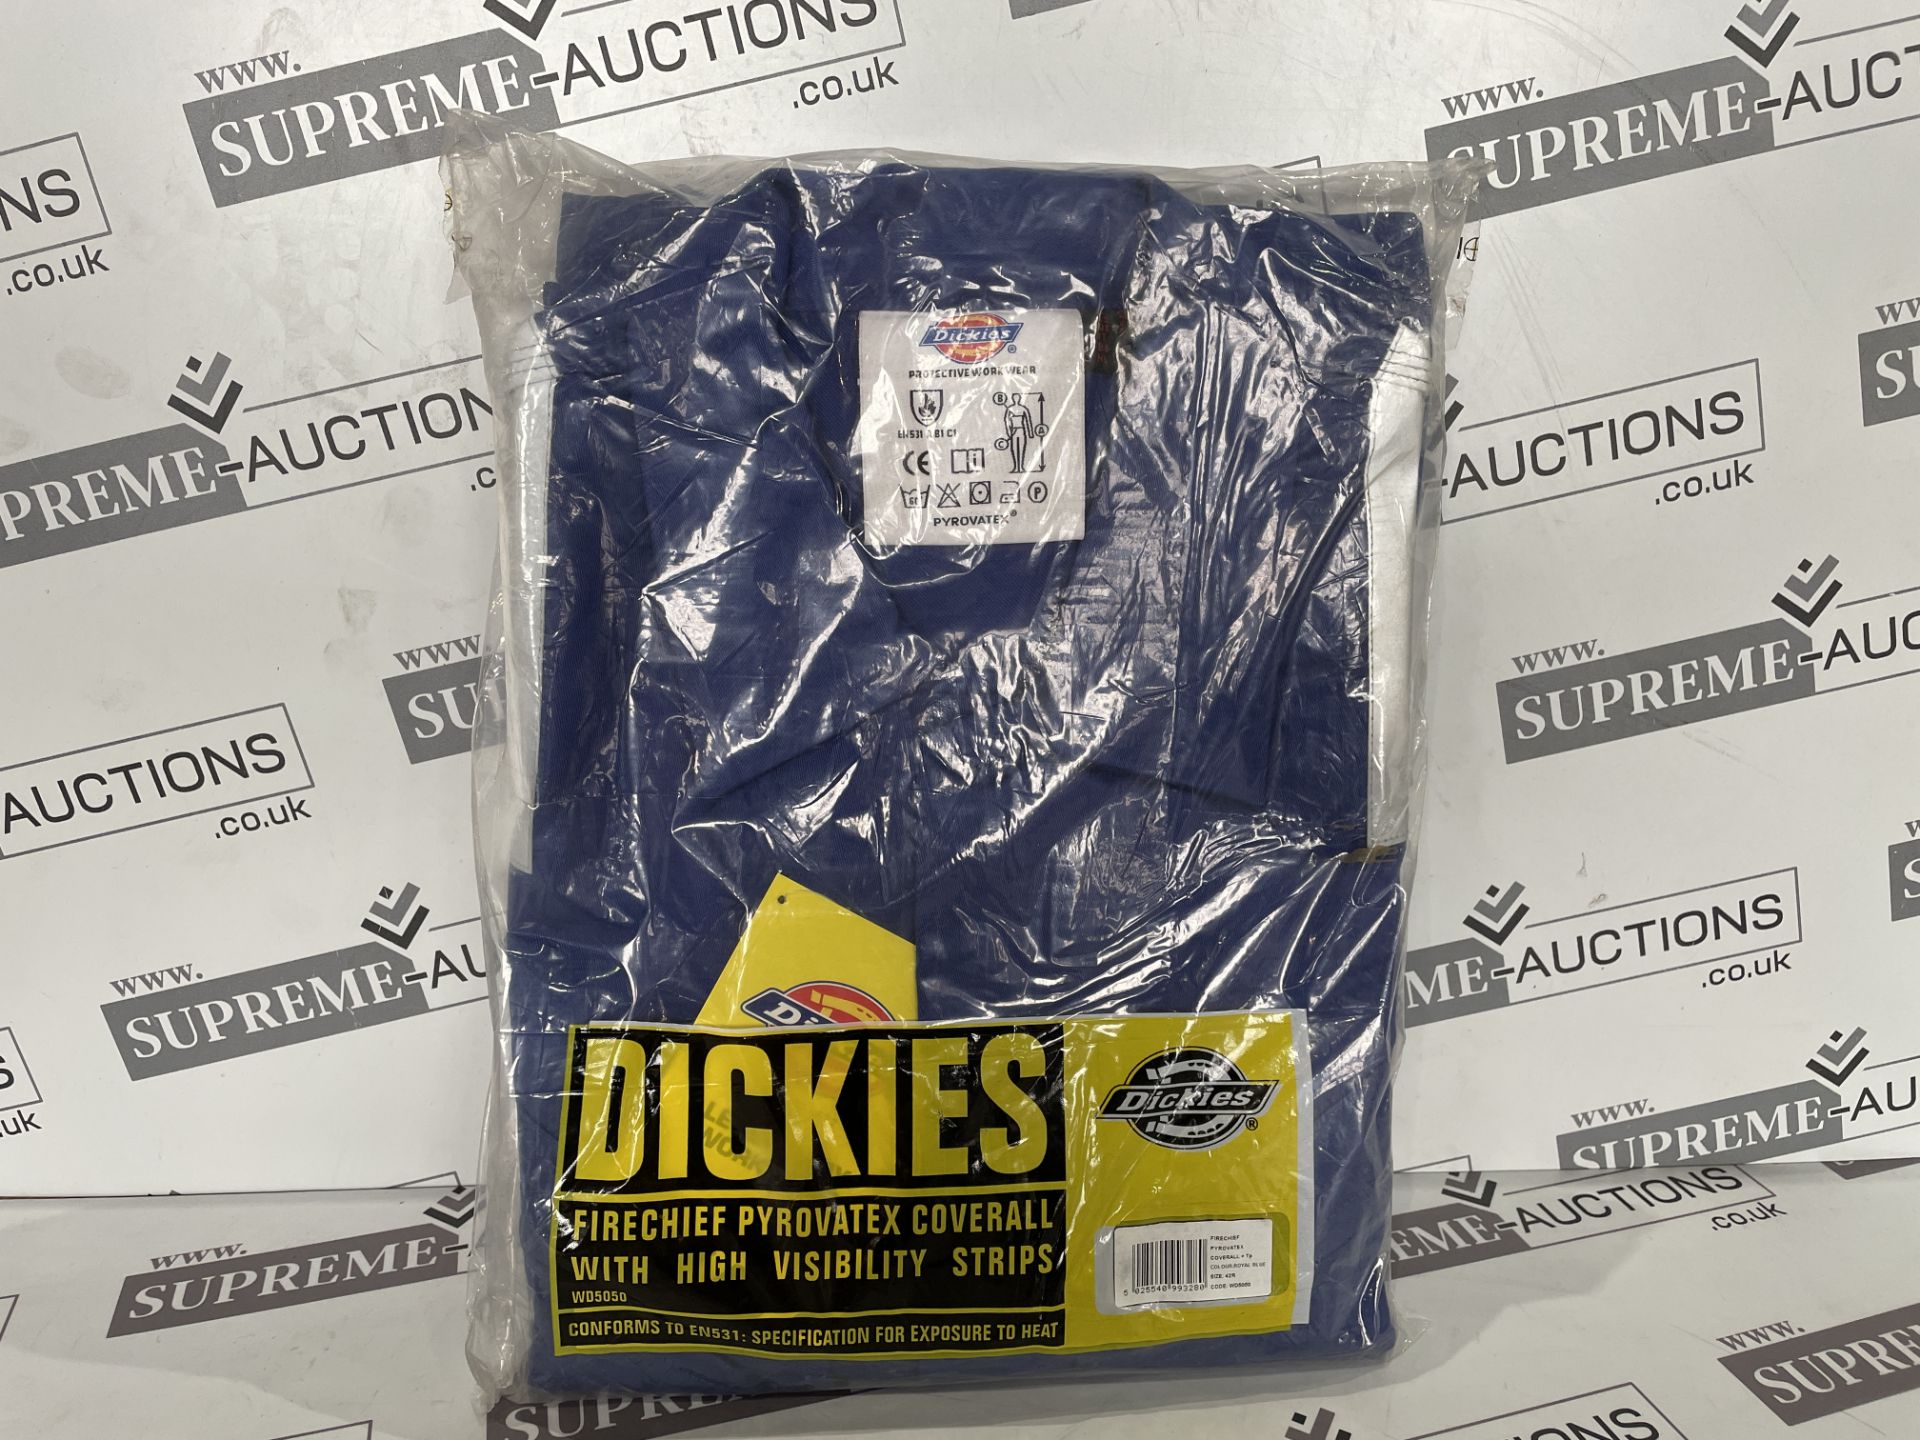 5 X BRAND NEW DICKIES FIRECHIEF PYROVATEX COVERALLS WITH HI VIZ STRIPS NAVY SIZE 50R R3-4